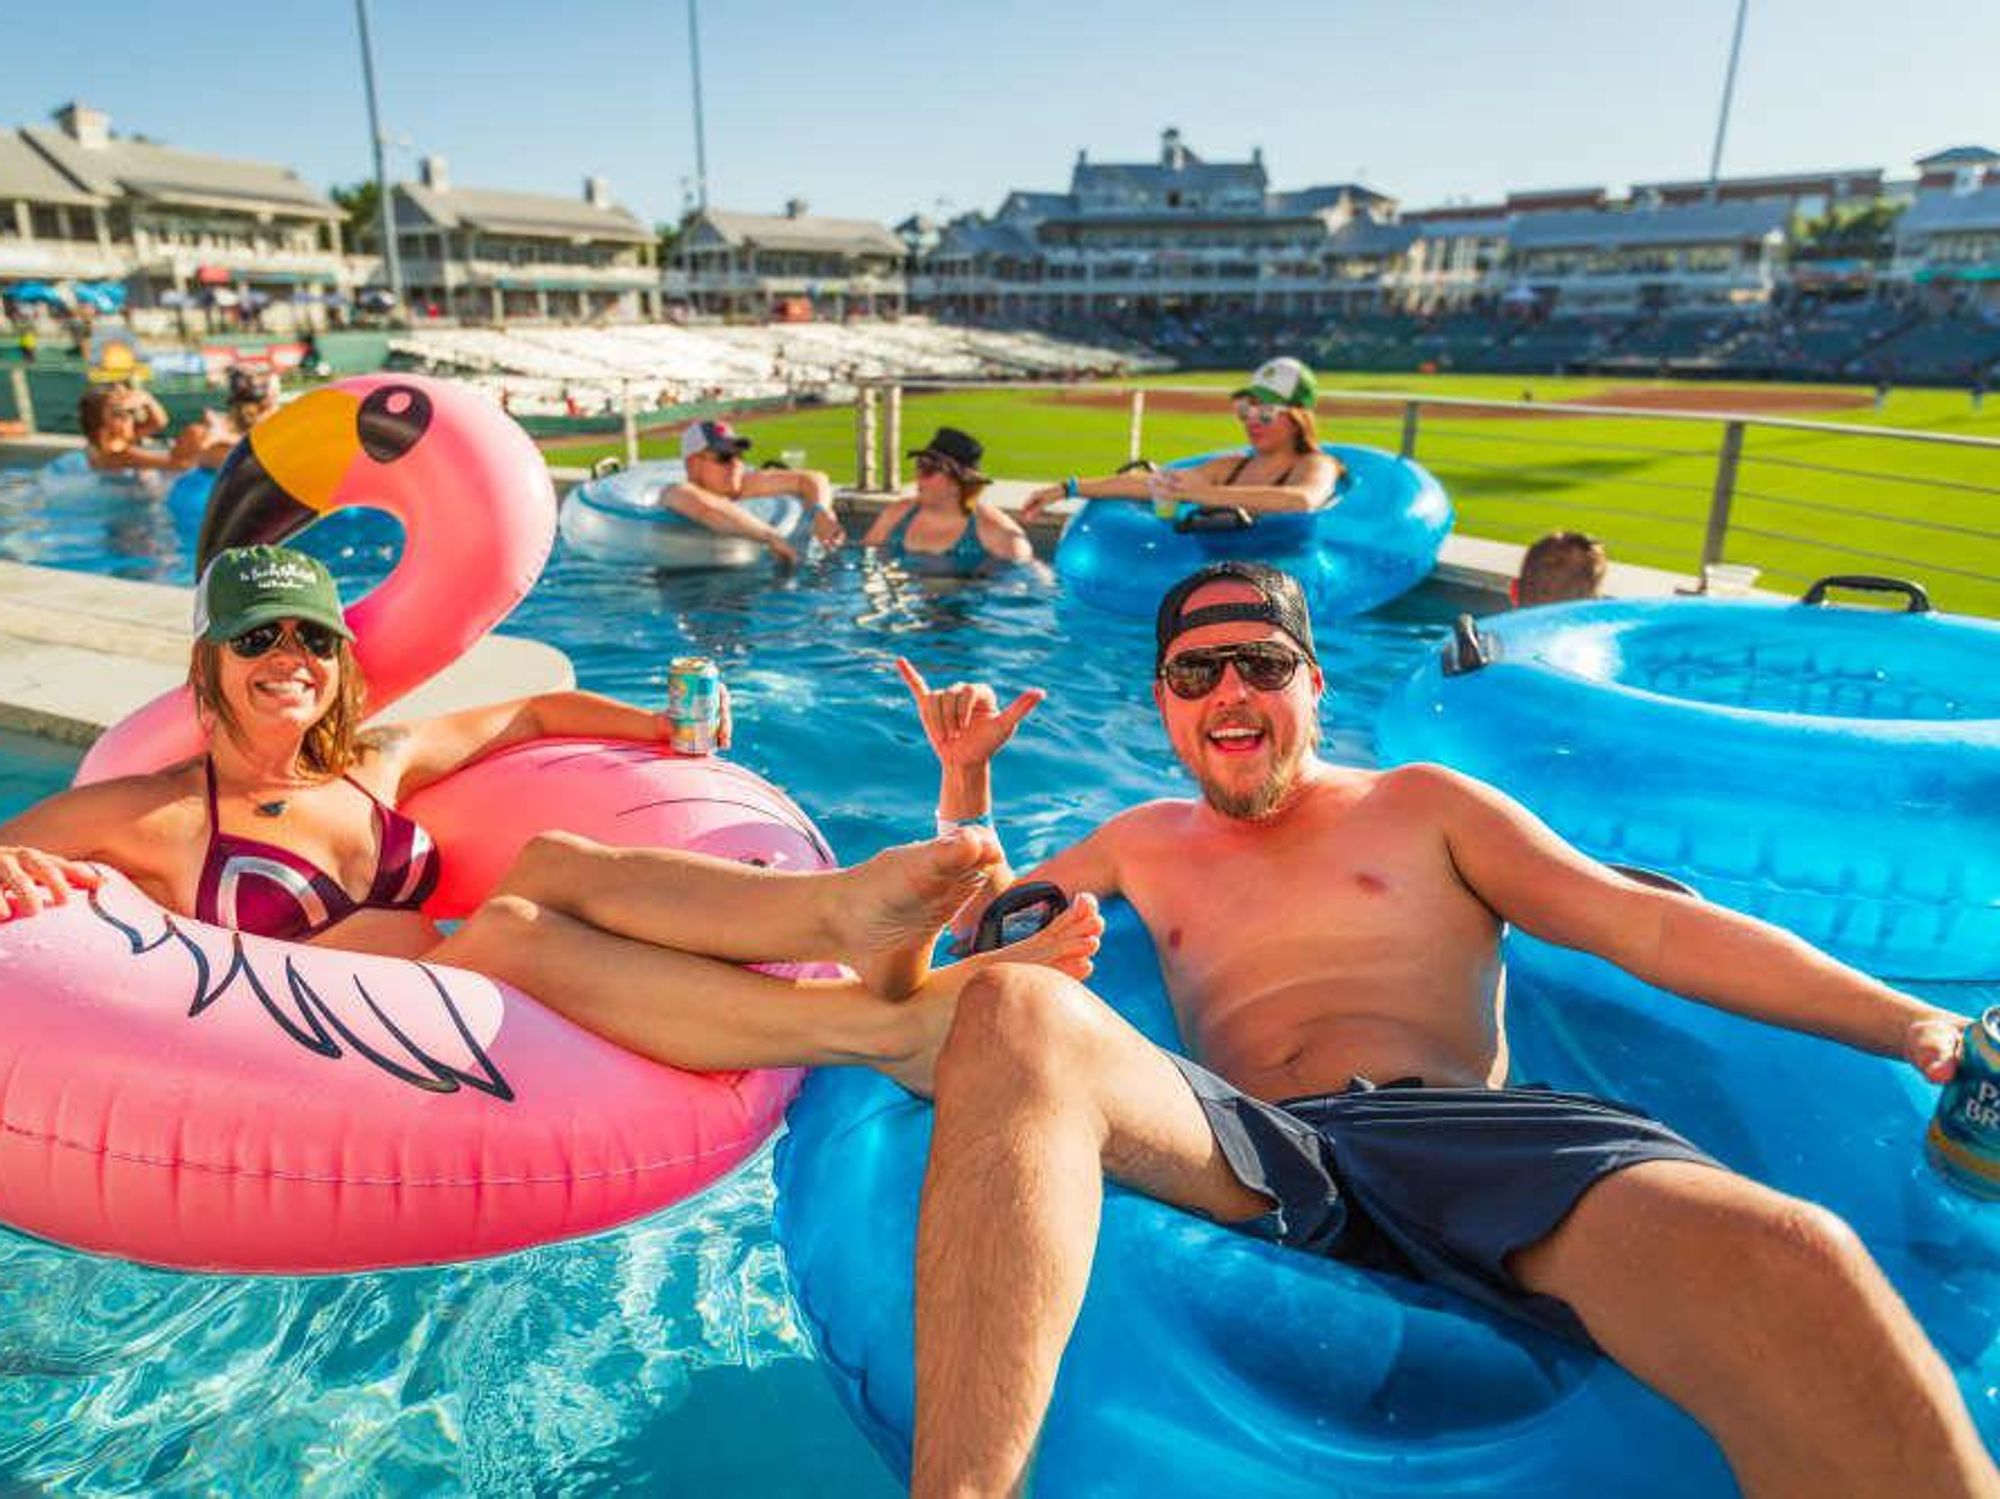 Catch a baseball game from the Lazy River at Rider's Field.